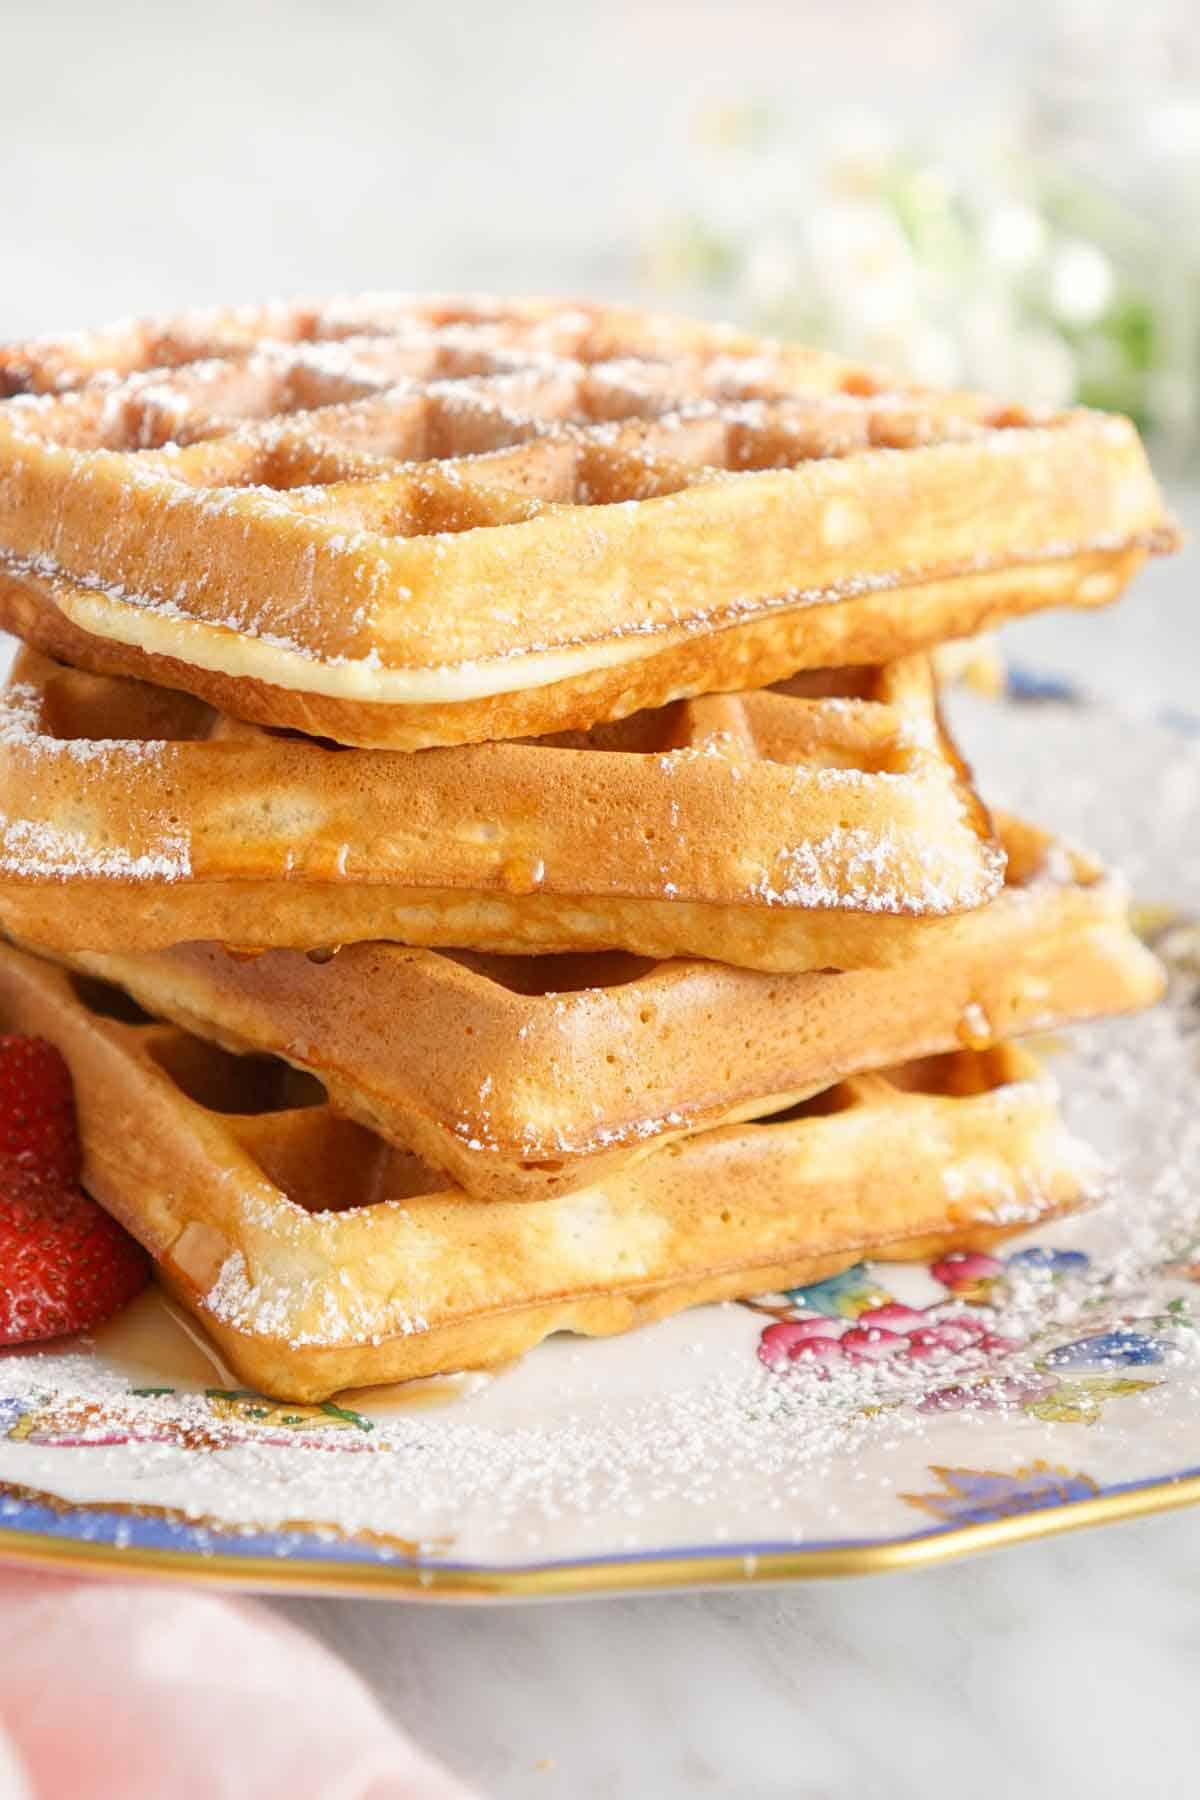 A profile view of a stack of waffles with powdered sugar dusted on top.